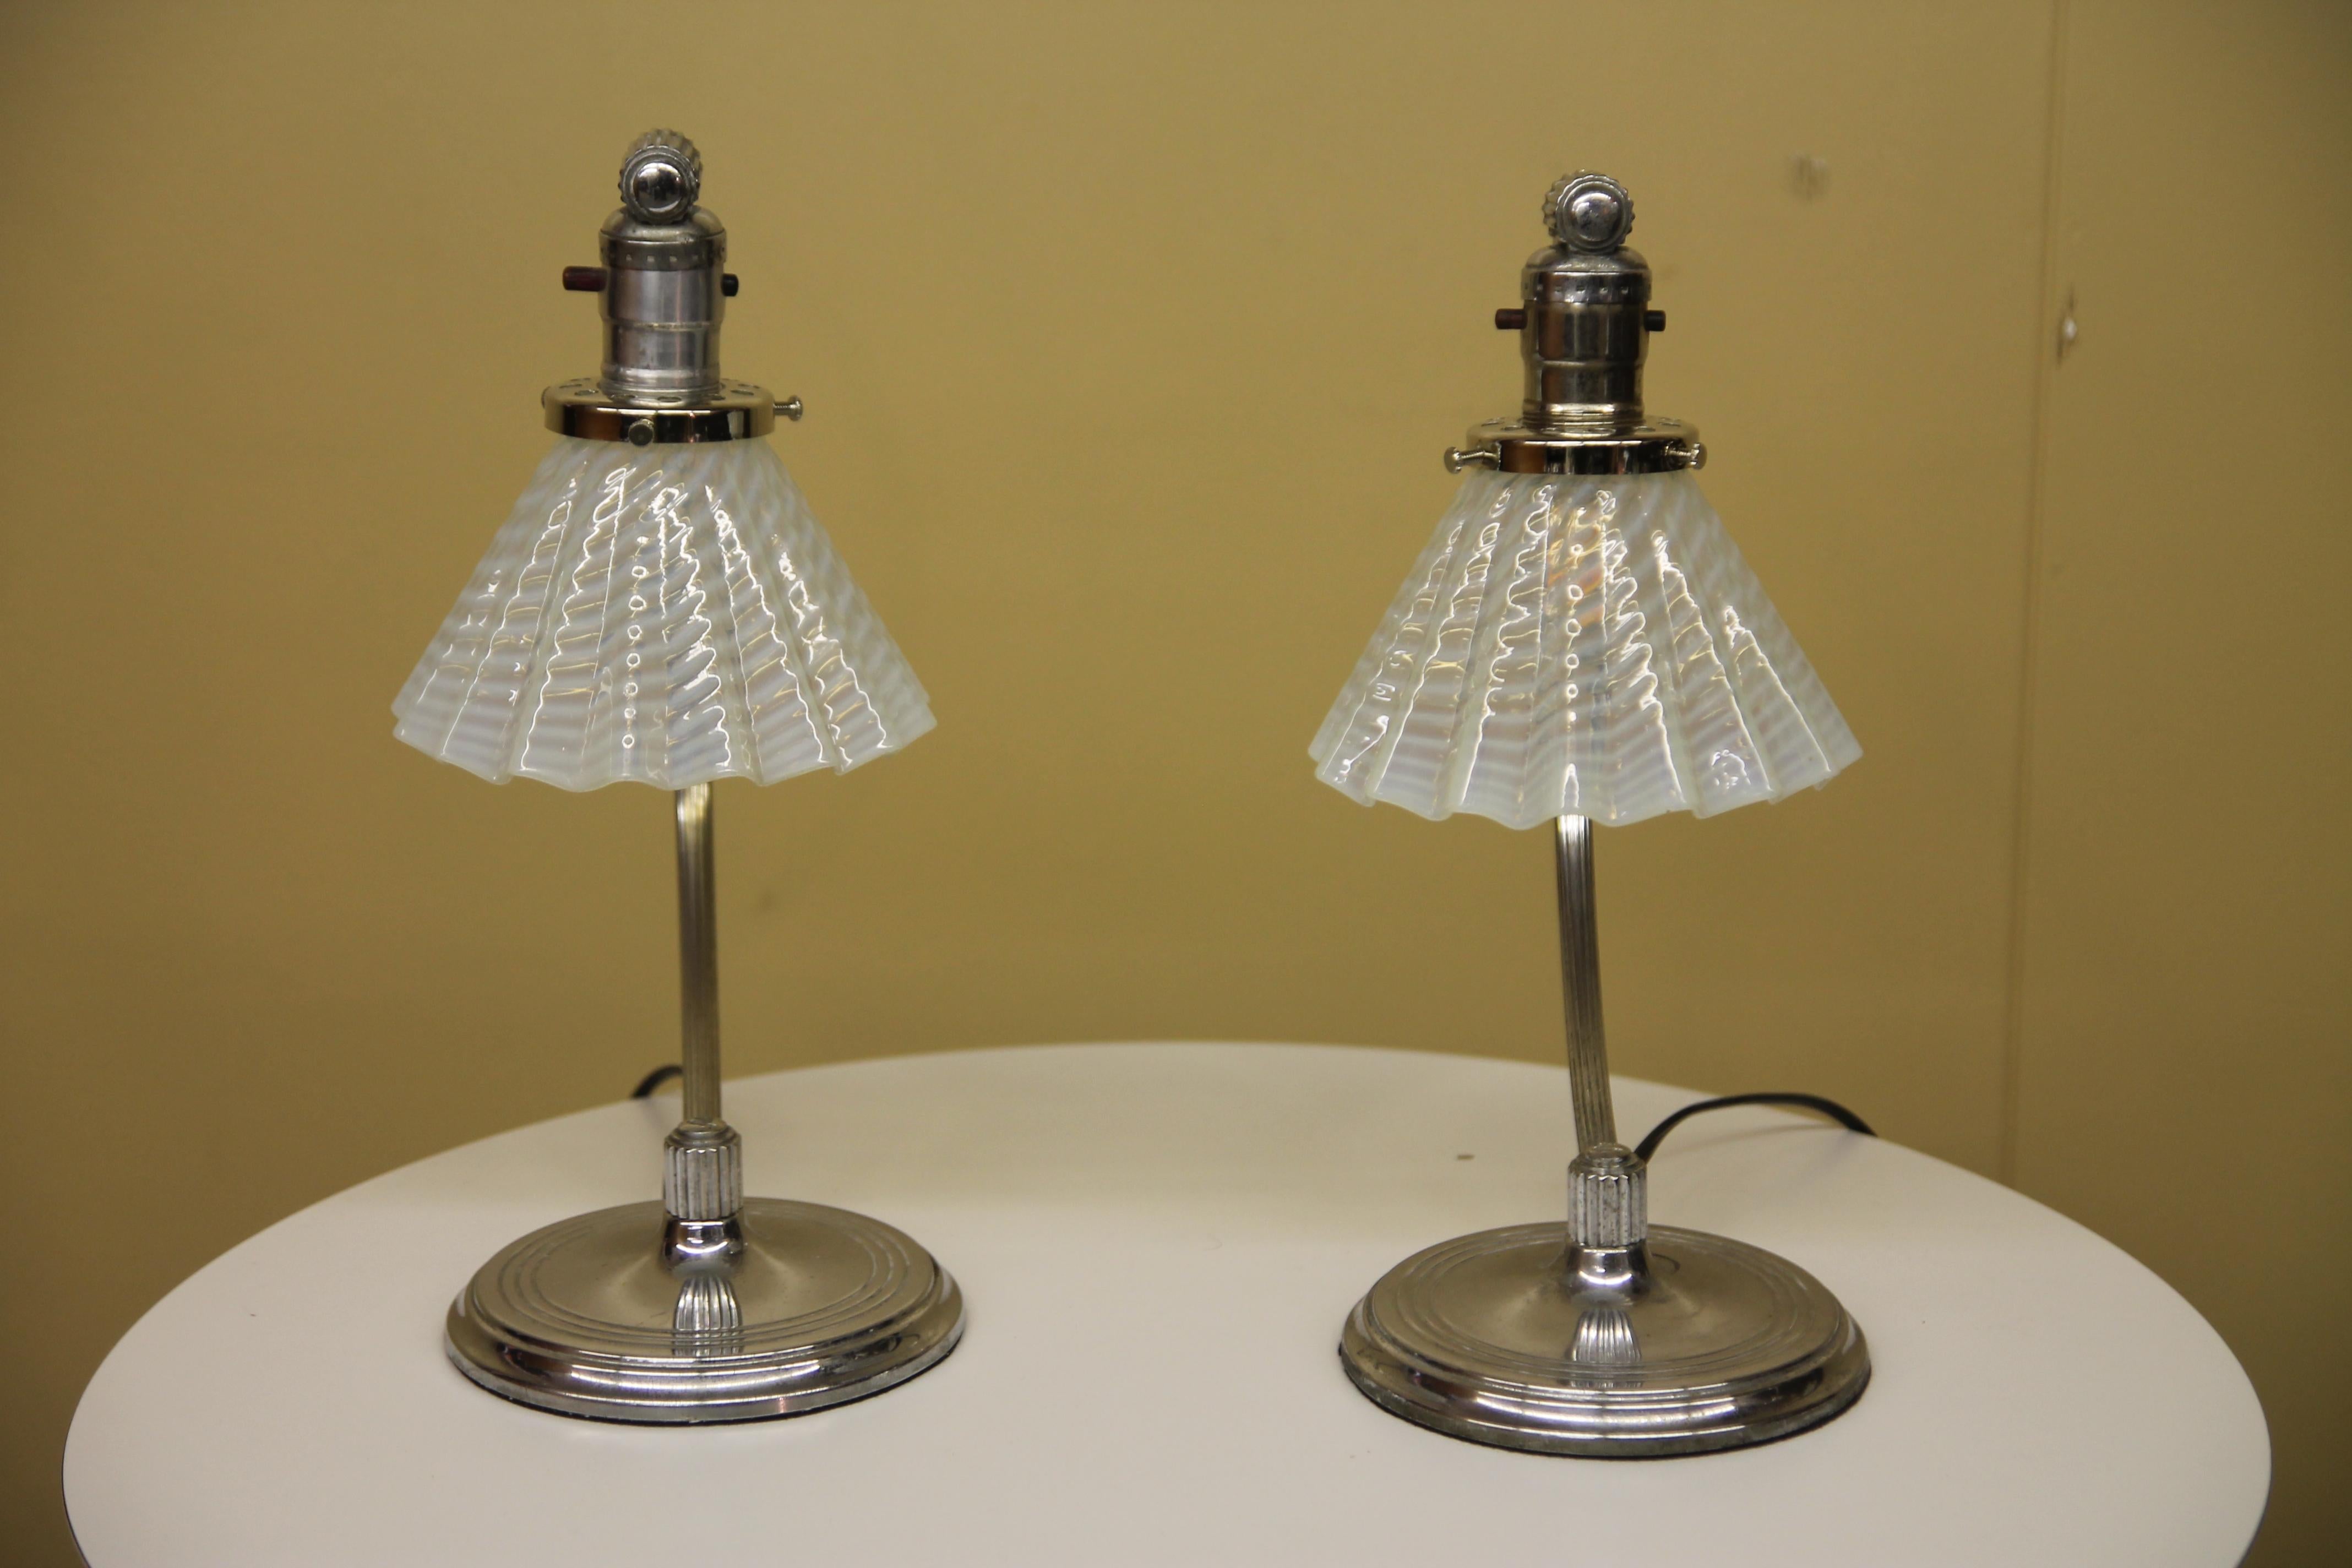 Wonderful pair of lamps by the Chase with vintage vaseline glass shade. Lamps have been newly rewired and looks great with or without the light on.
 